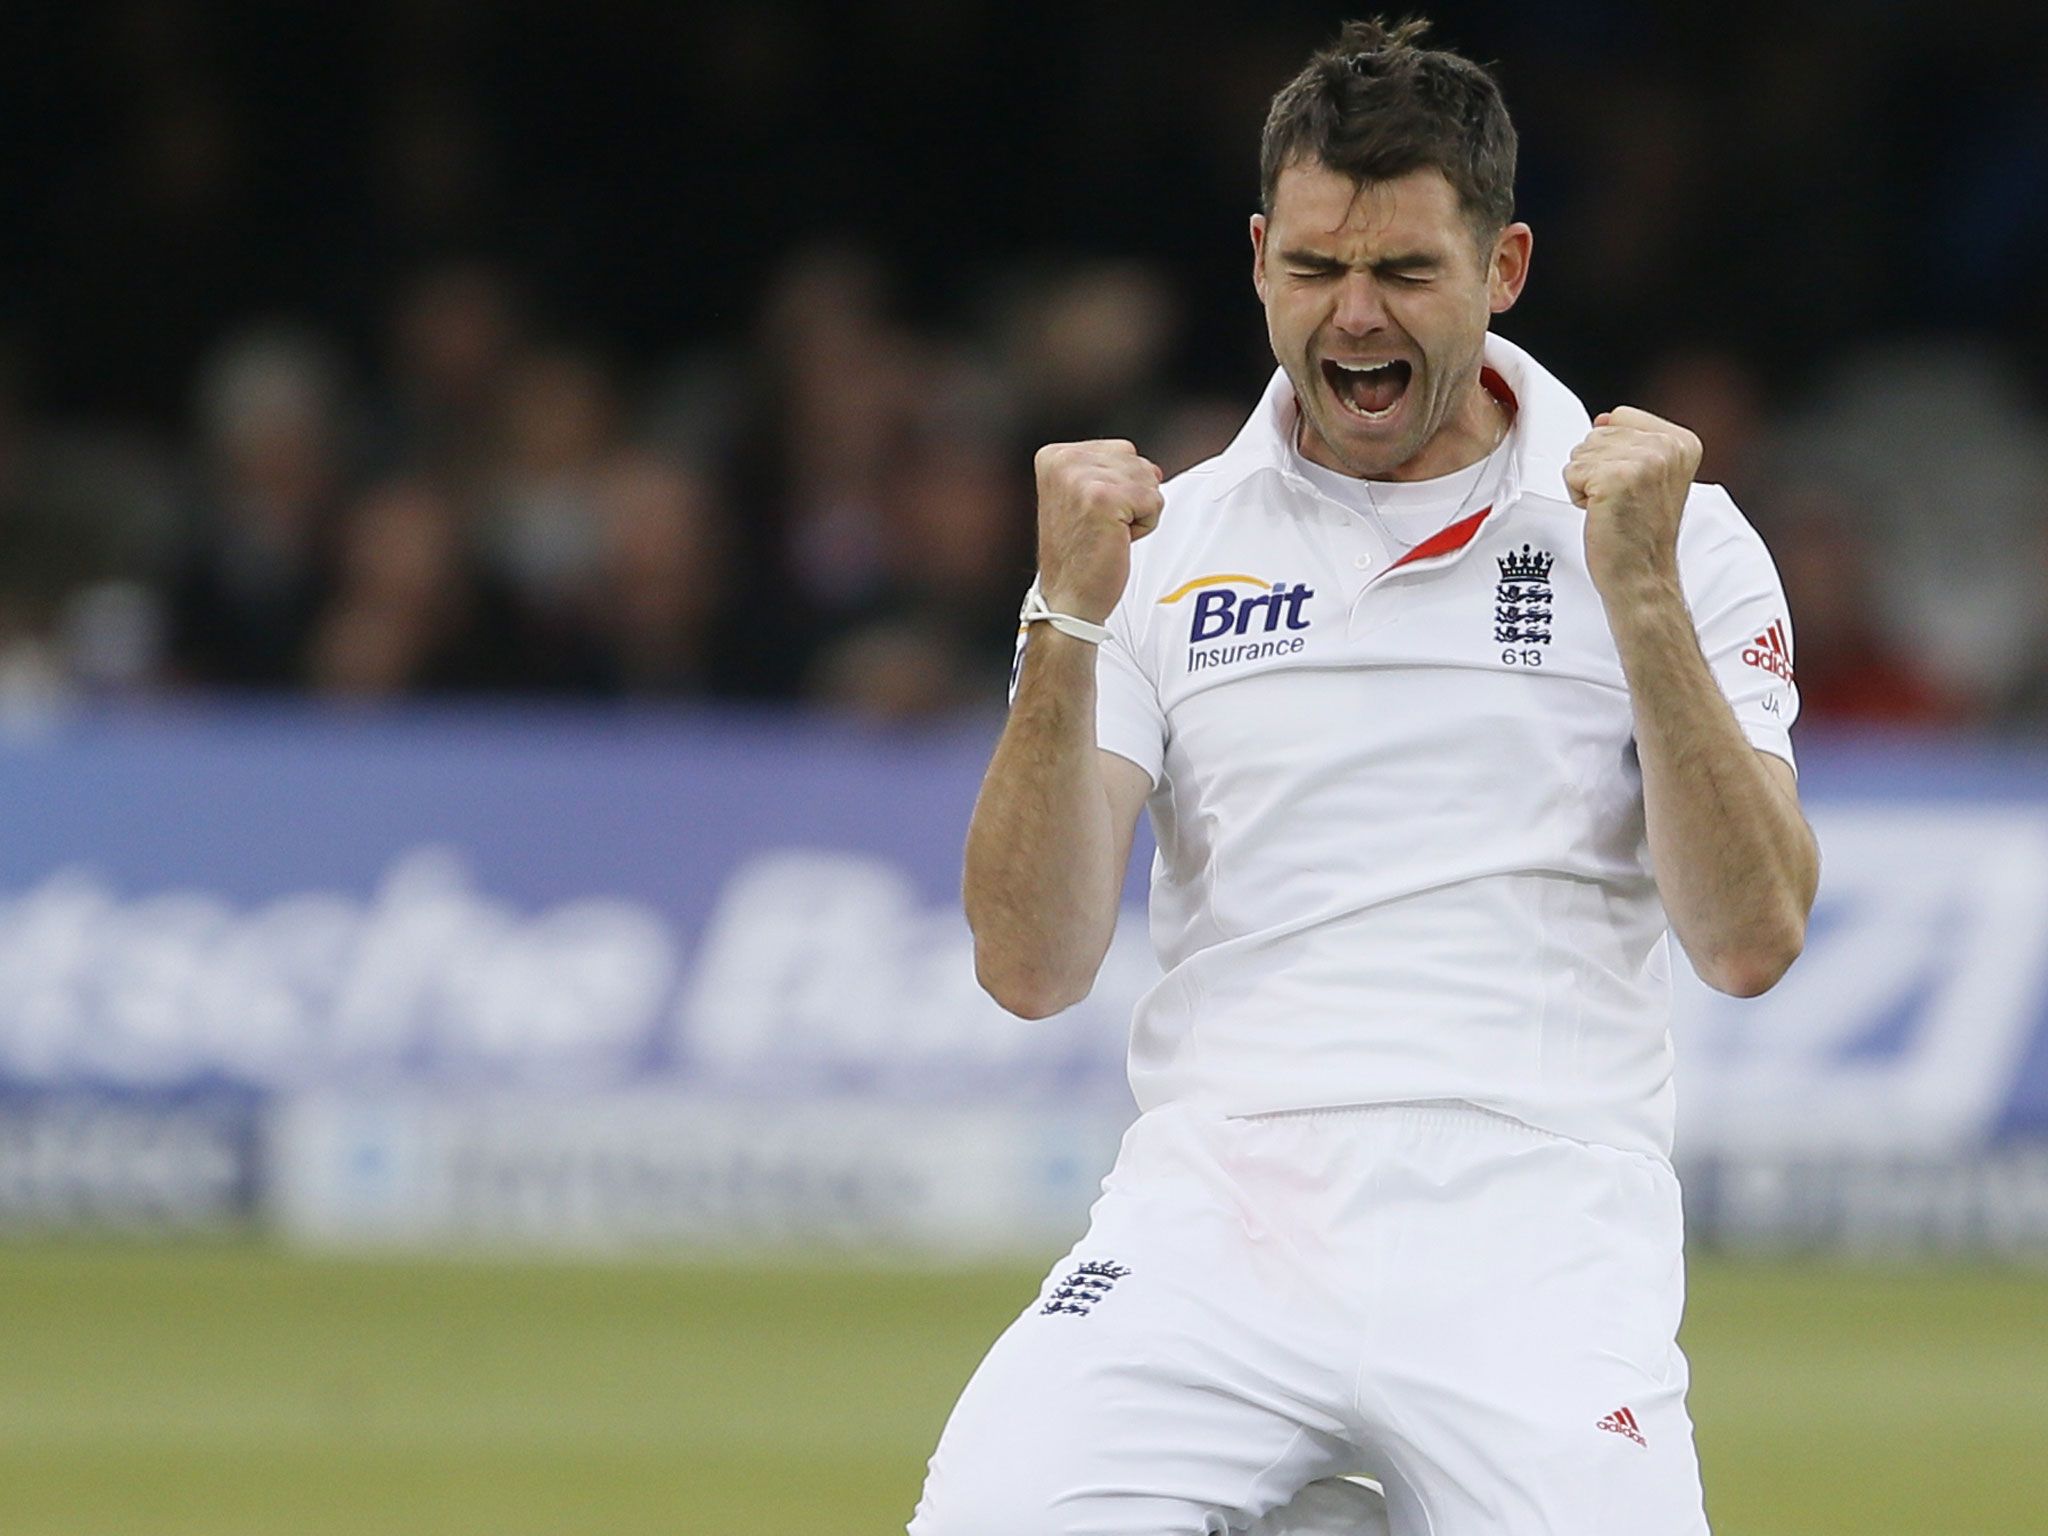 England's James Anderson Joins 500 Wicket Club